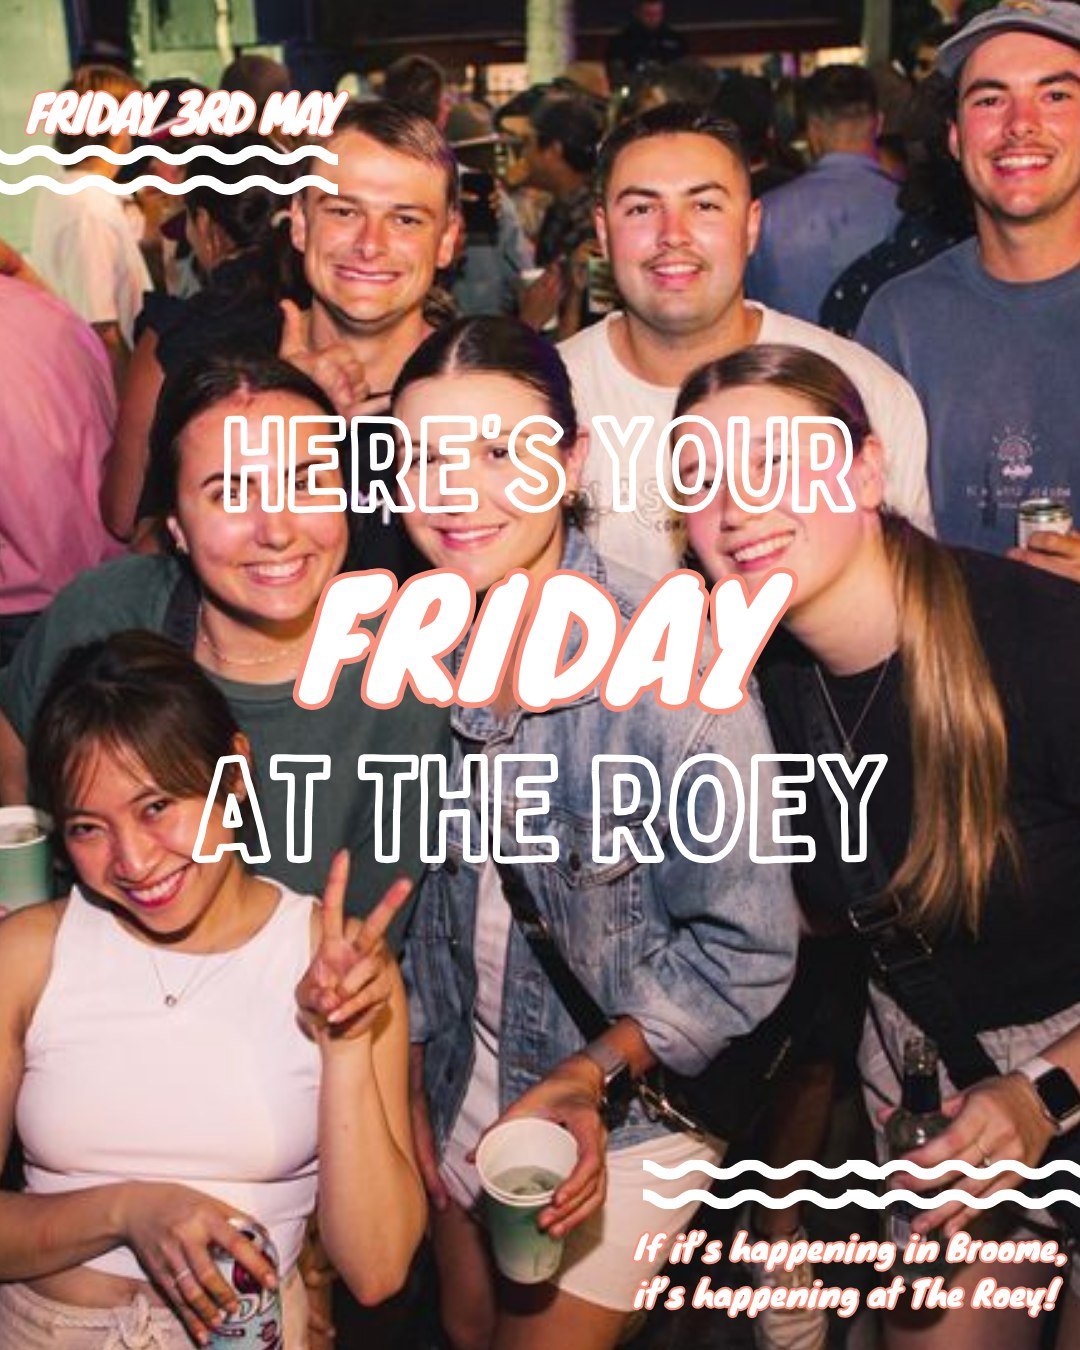 Finish your week strong &amp; do FriYAY the ROEY way! ✌🏽😎

🎱 Sink The Pink - Tickets from 3pm, with a chance to take your shot at 5pm... WIN CA$H!

🥩 Meat Tray Friday's - Tickets from 5pm, drawn at 7pm, plenty of MEAT to be won 🍖 perfect for tho